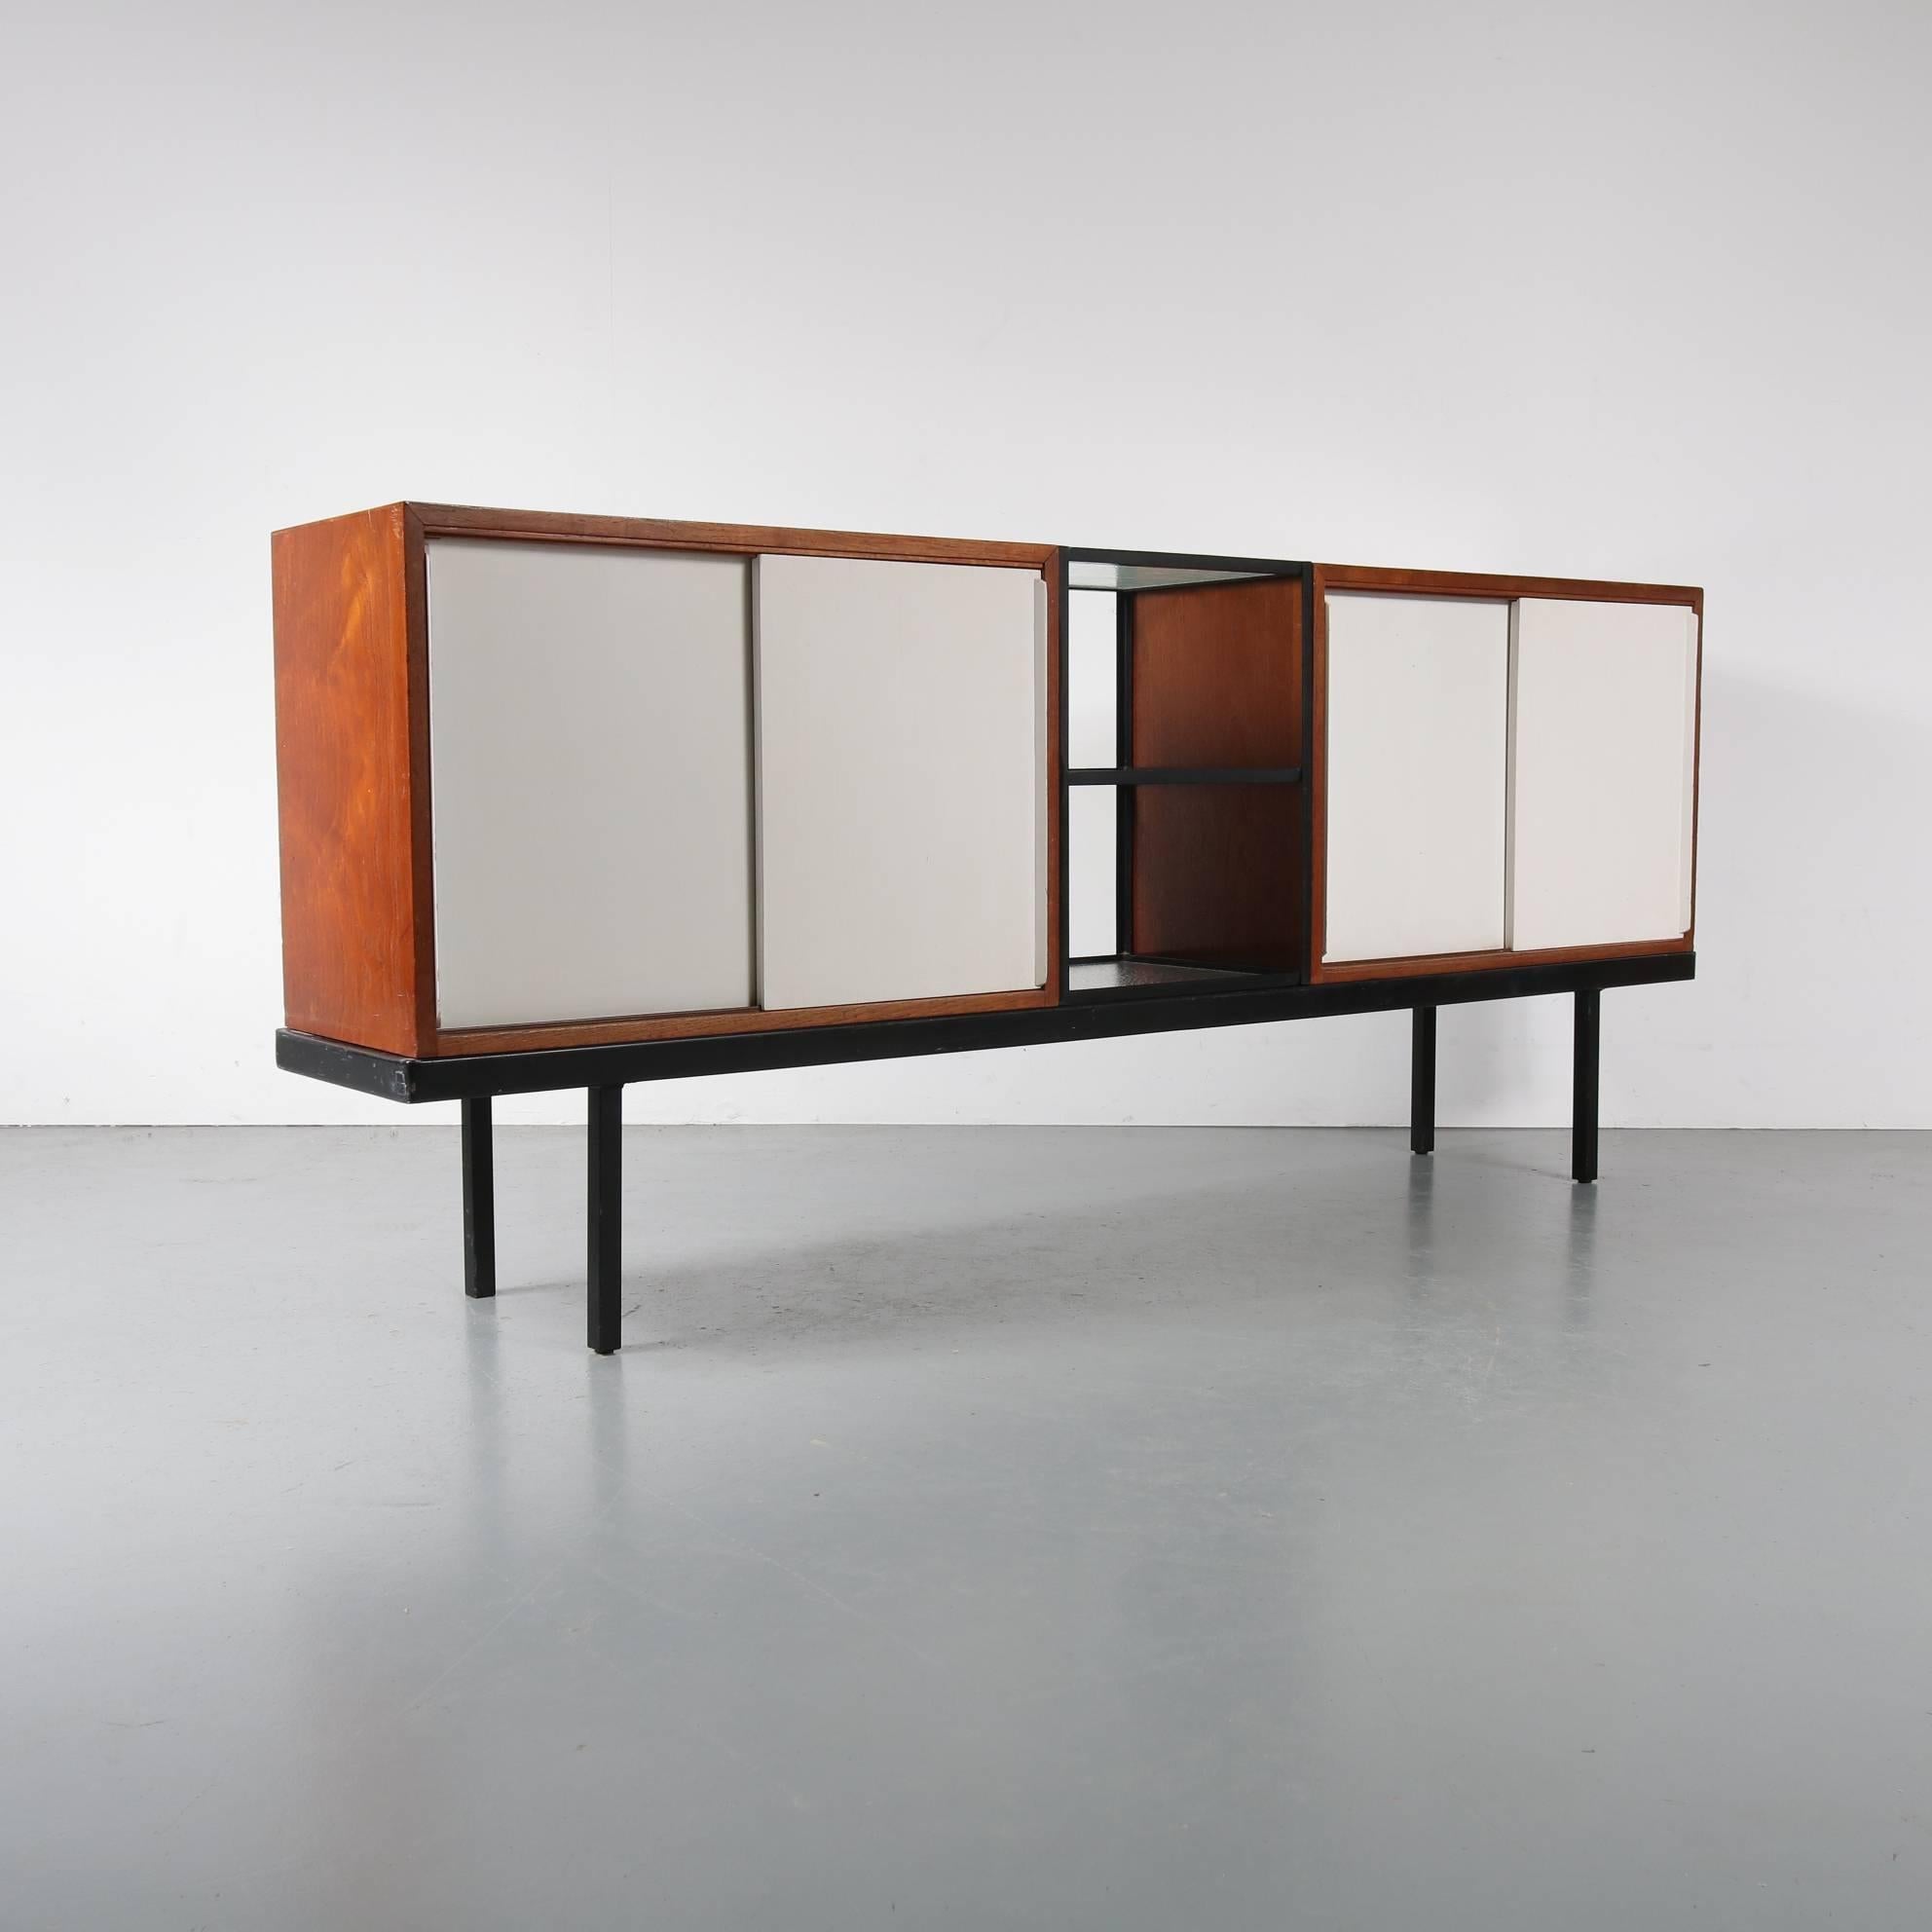 An exceptional, very rare sideboard designed by Dutch designer Martin Visser, manufactured by Spectrum the Netherlands around 1950.

This eye-catching piece has a high quality black metal frame and a unique structure that allows rearranging of the